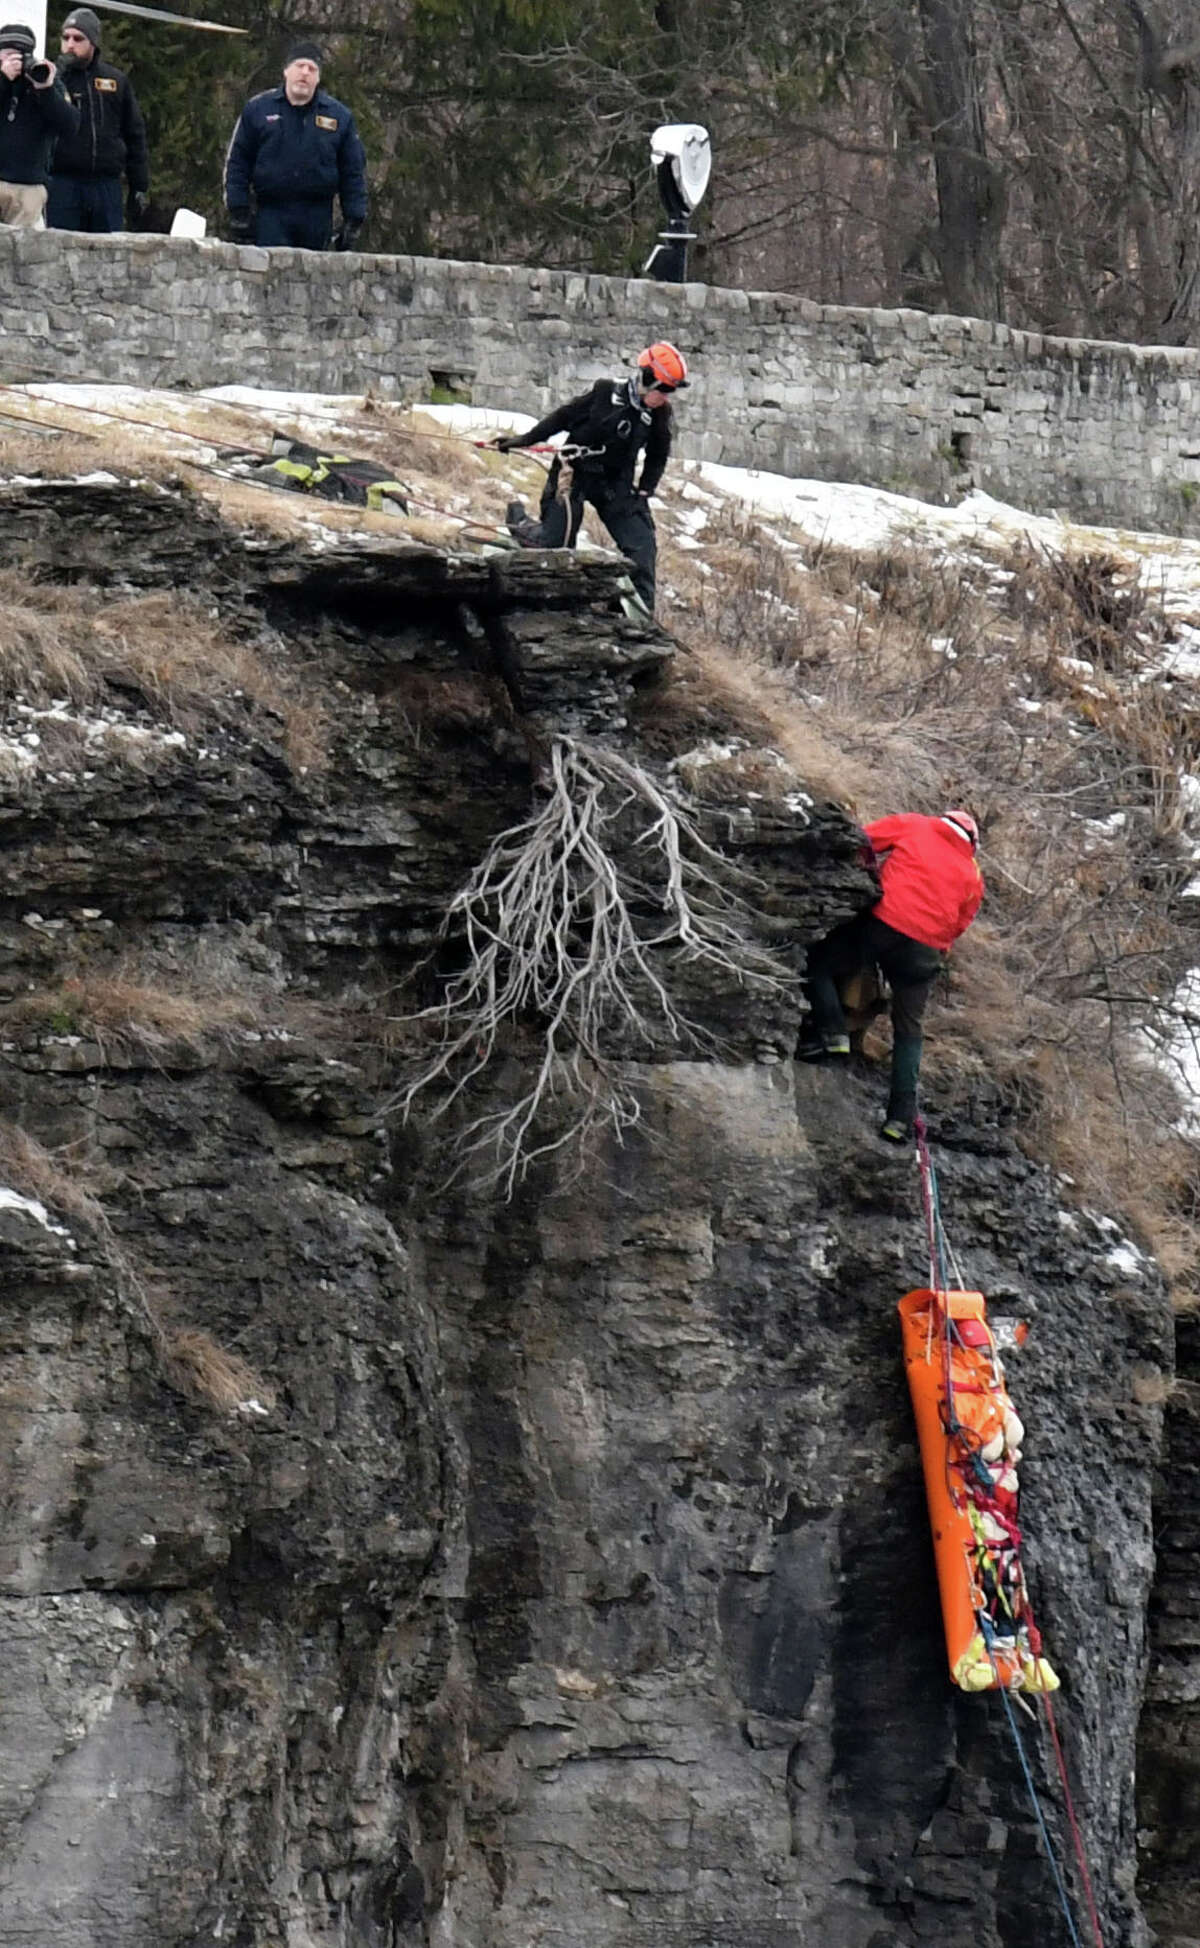 Zachary L. Barrantes, 25, is rescued from the John Boyd Thacher State Park escarpment on Friday, Jan. 3, 2020, in New Scotland, N.Y. Barrantes went missing on New Year's Eve after taking an Uber to the popular Albany County lookout. He survived three days of frigid temperatures. A rescue team discovered him Friday morning. (Will Waldron/Times Union)